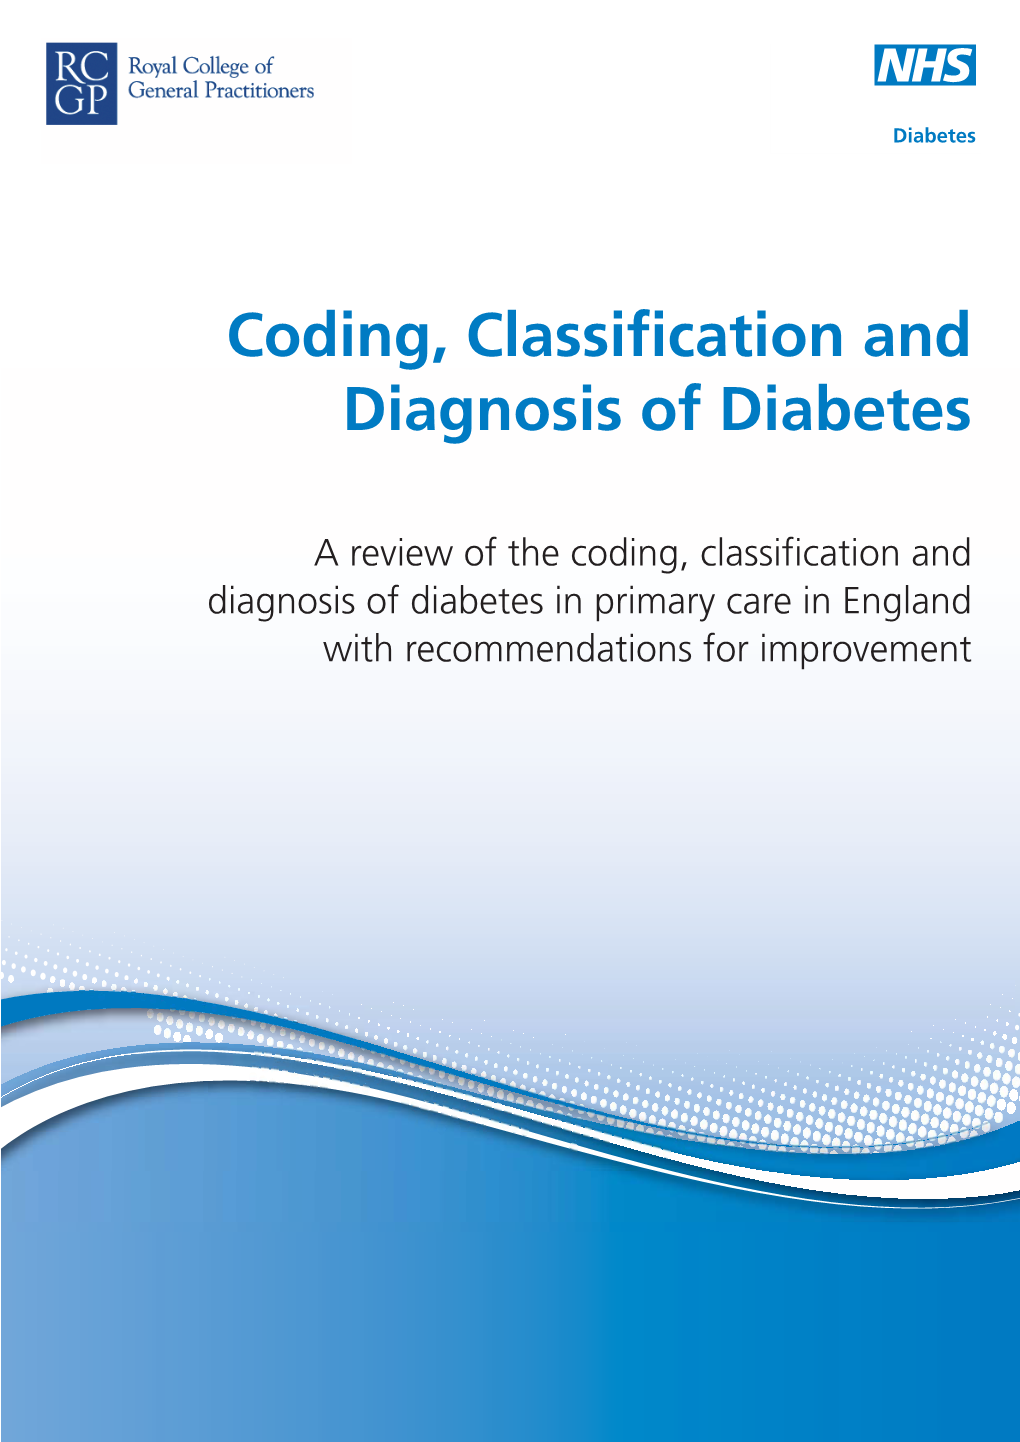 Coding, Classification and Diagnosis of Diabetes